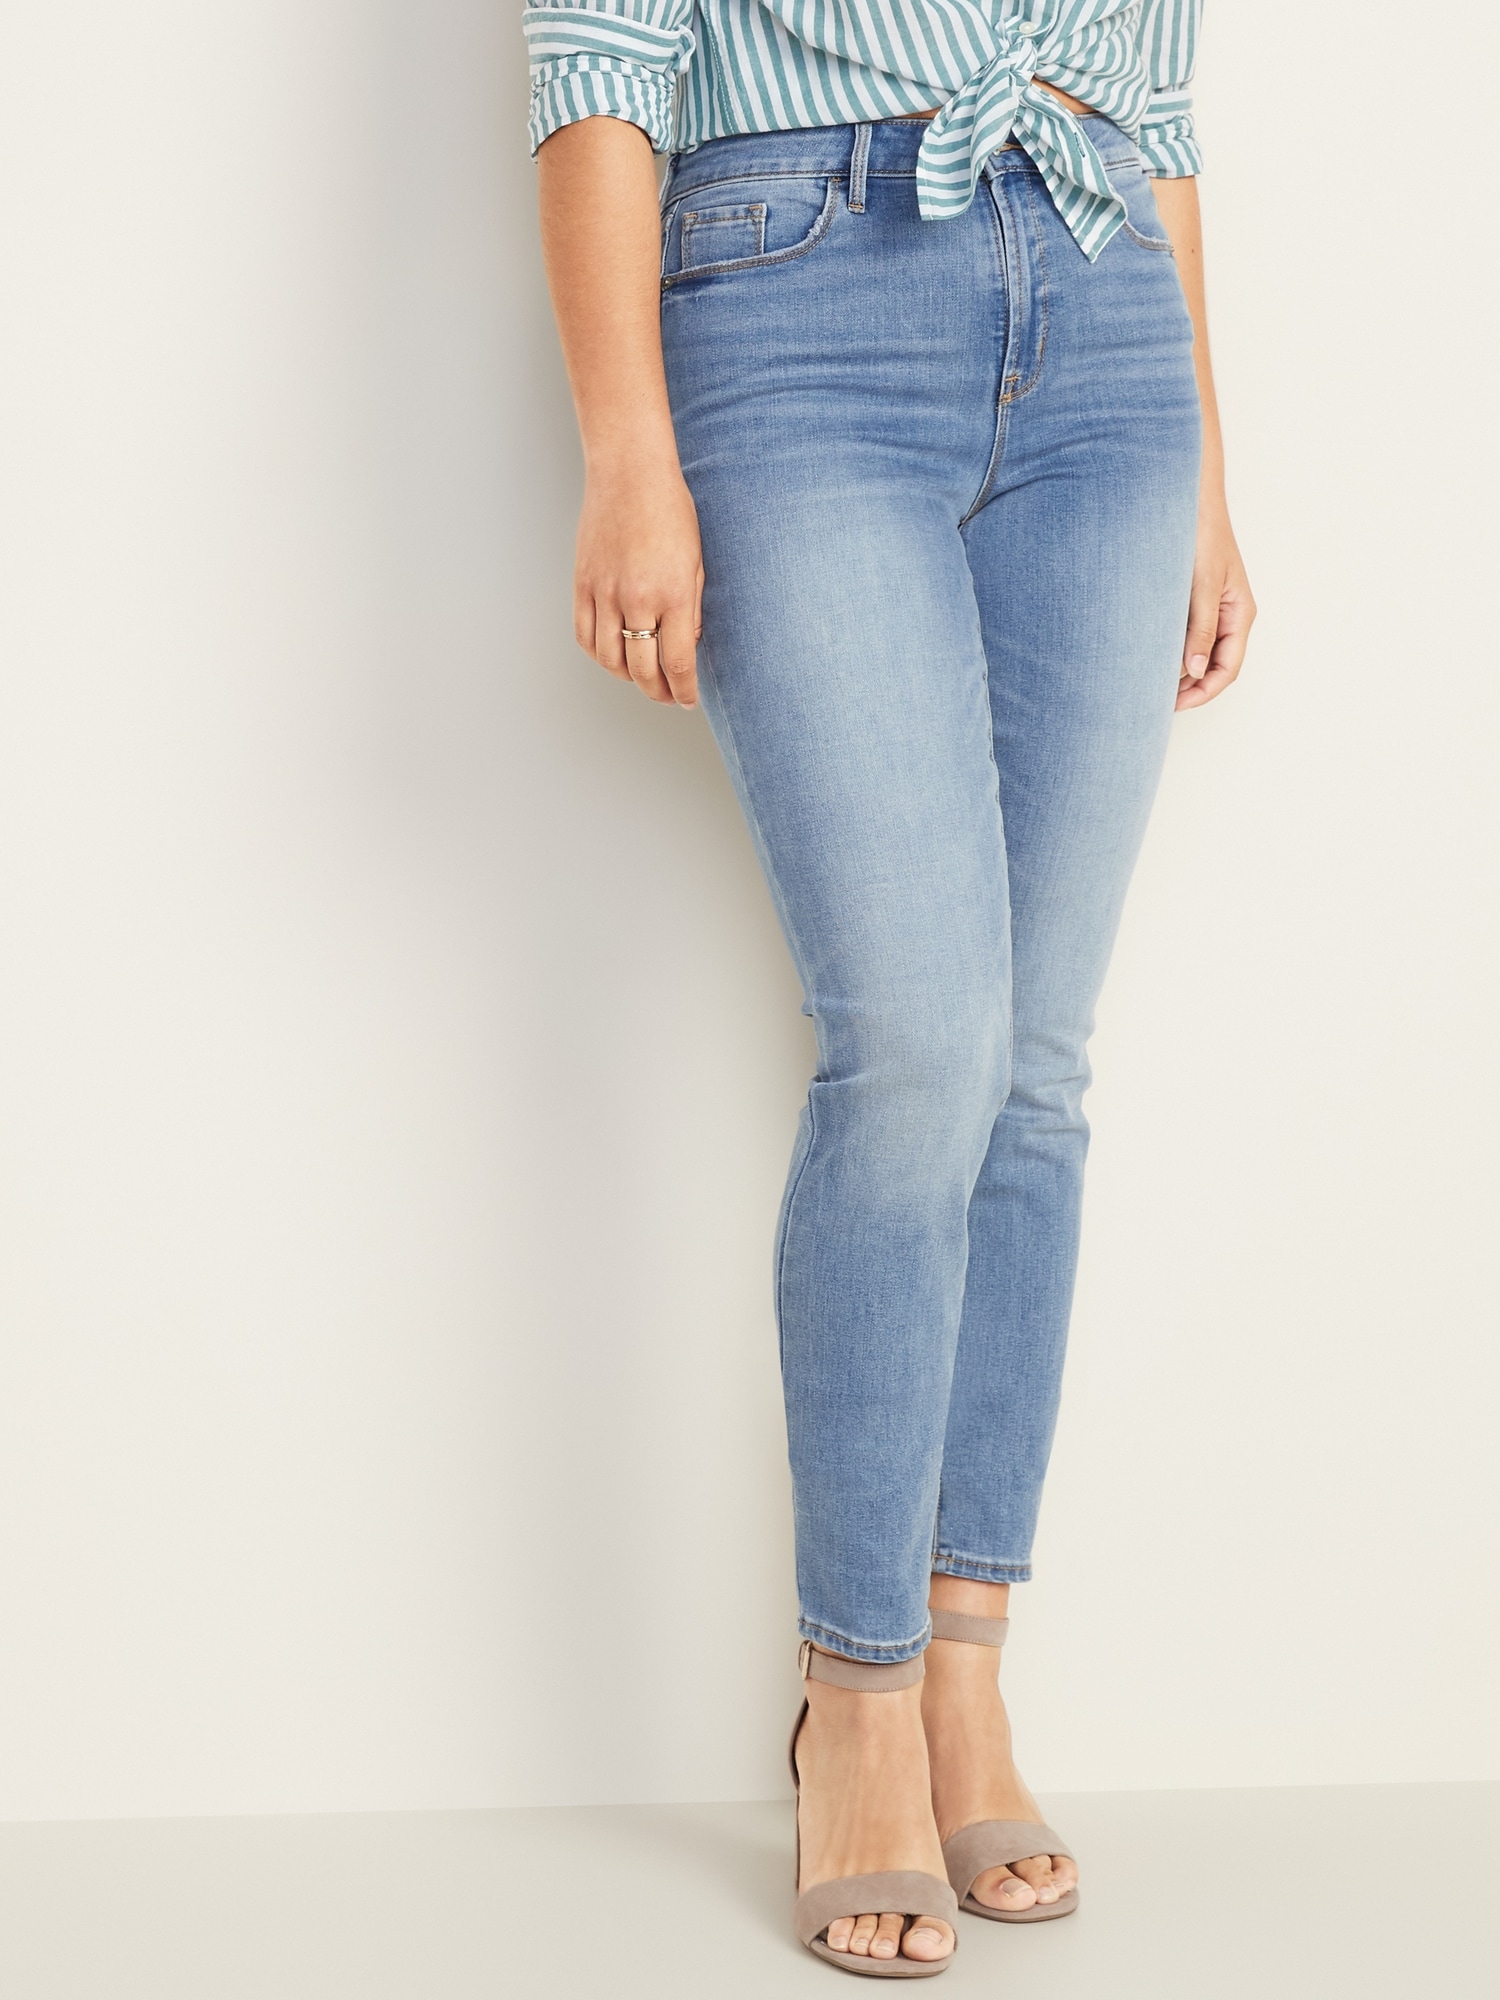 old navy pop icon skinny jeans